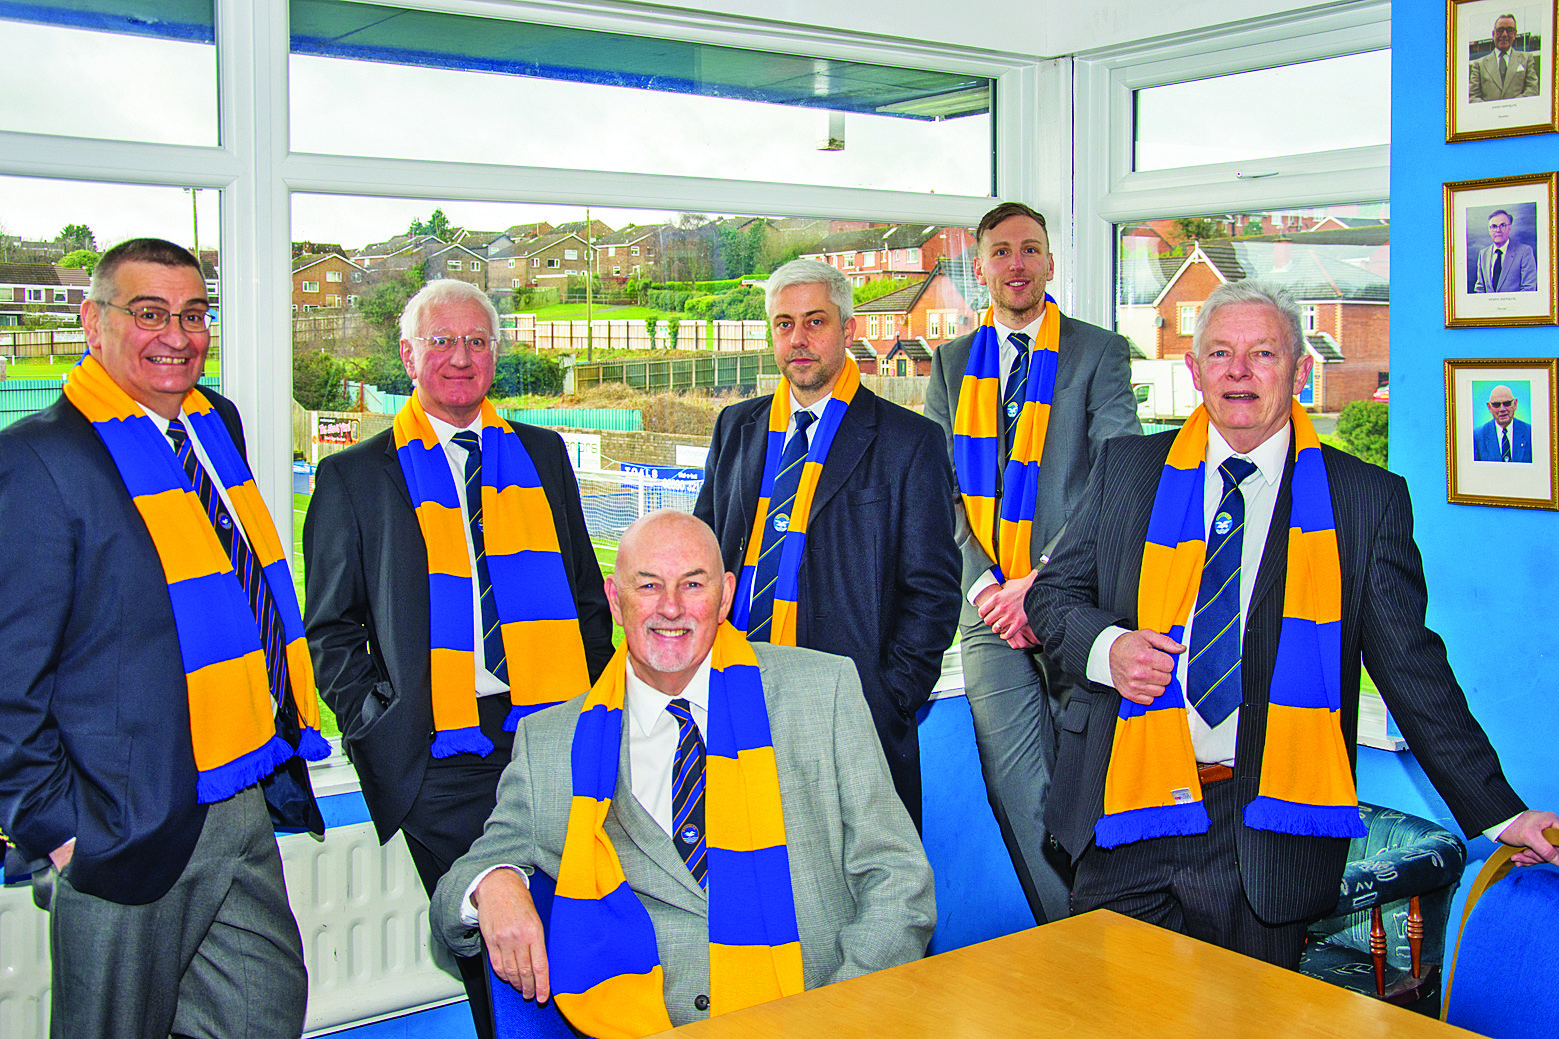 Bangor FC Chairman, “We took over a sinking ship”